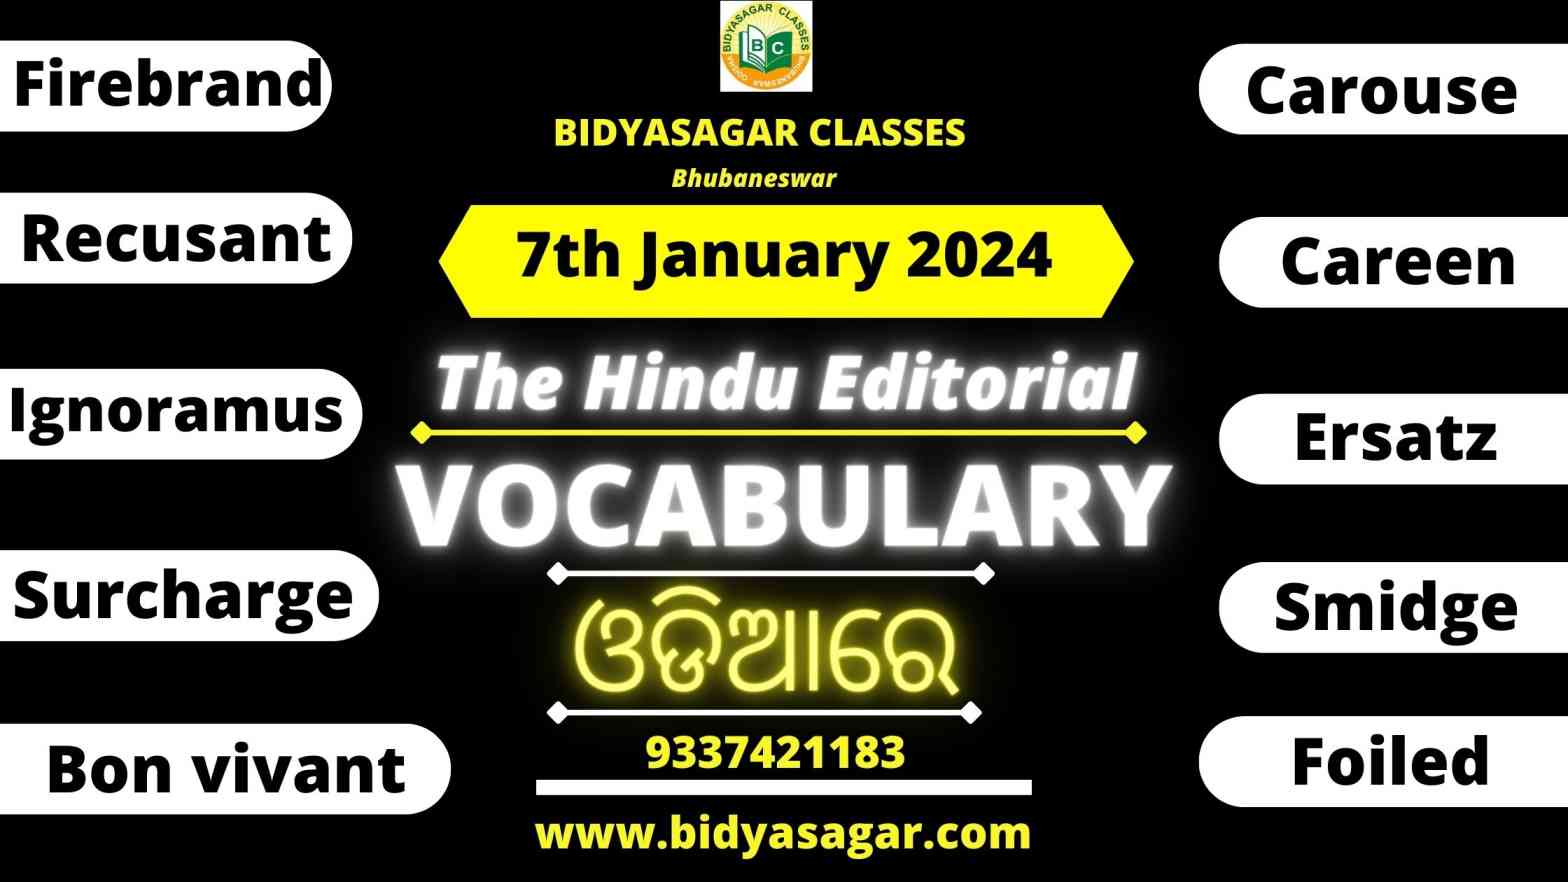 The Hindu Editorial Vocabulary of 7th January 2024